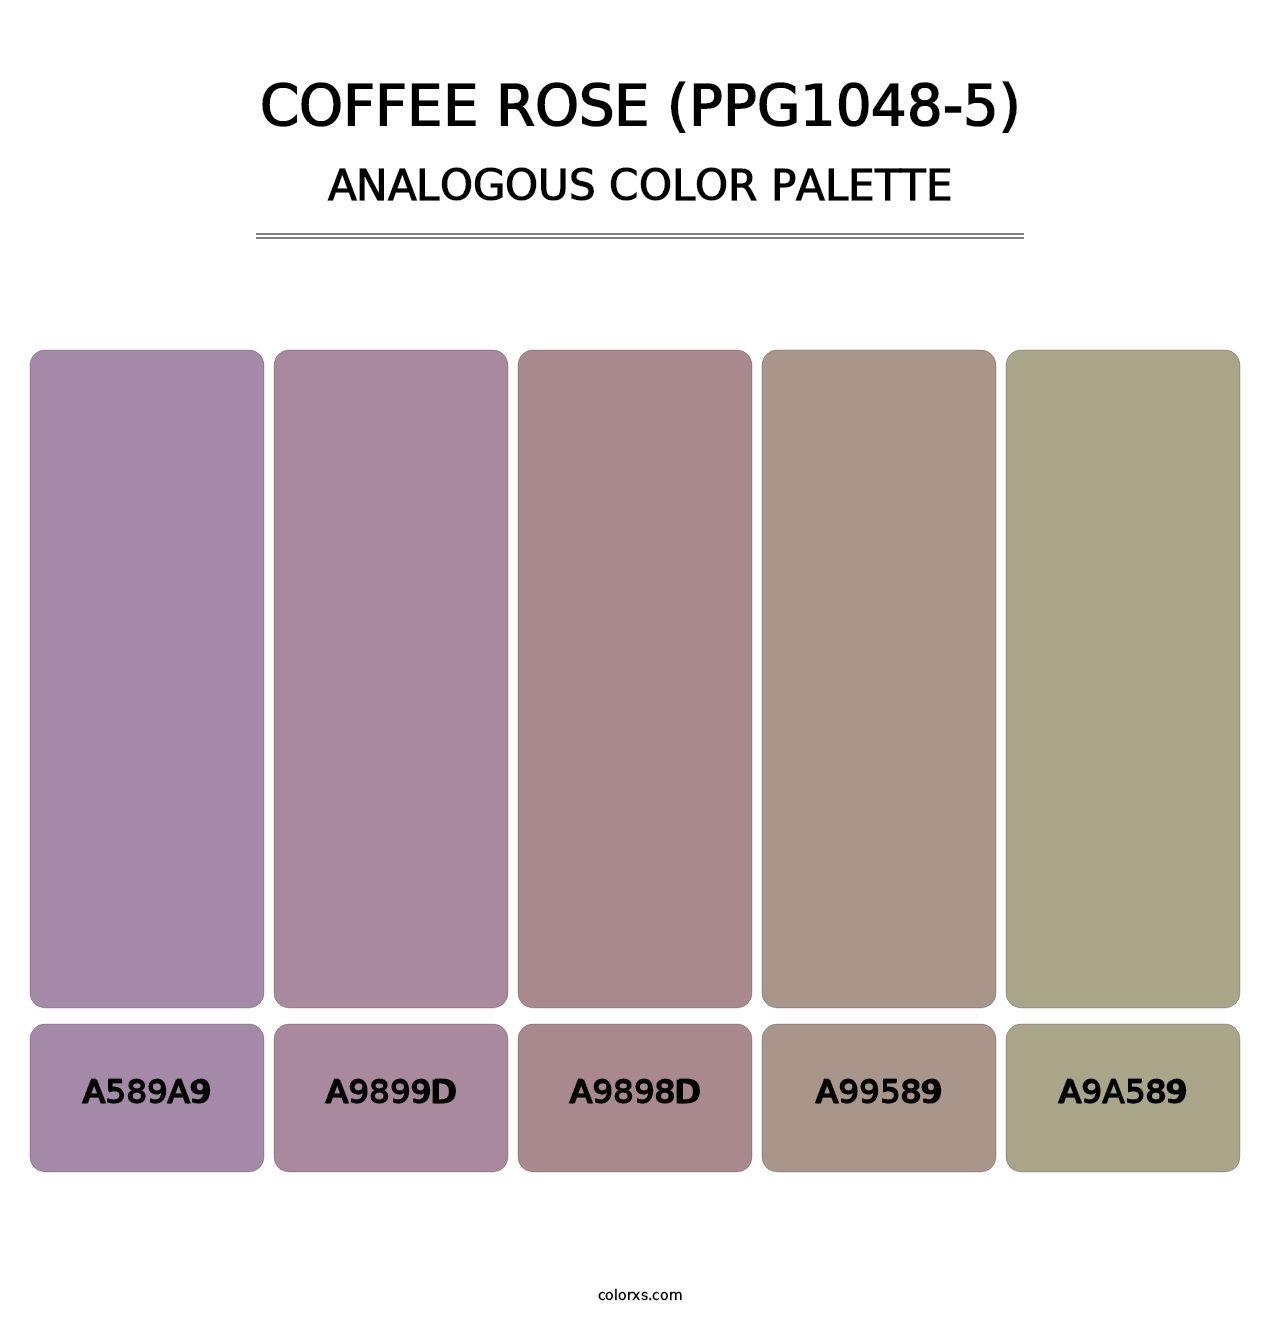 Coffee Rose (PPG1048-5) - Analogous Color Palette